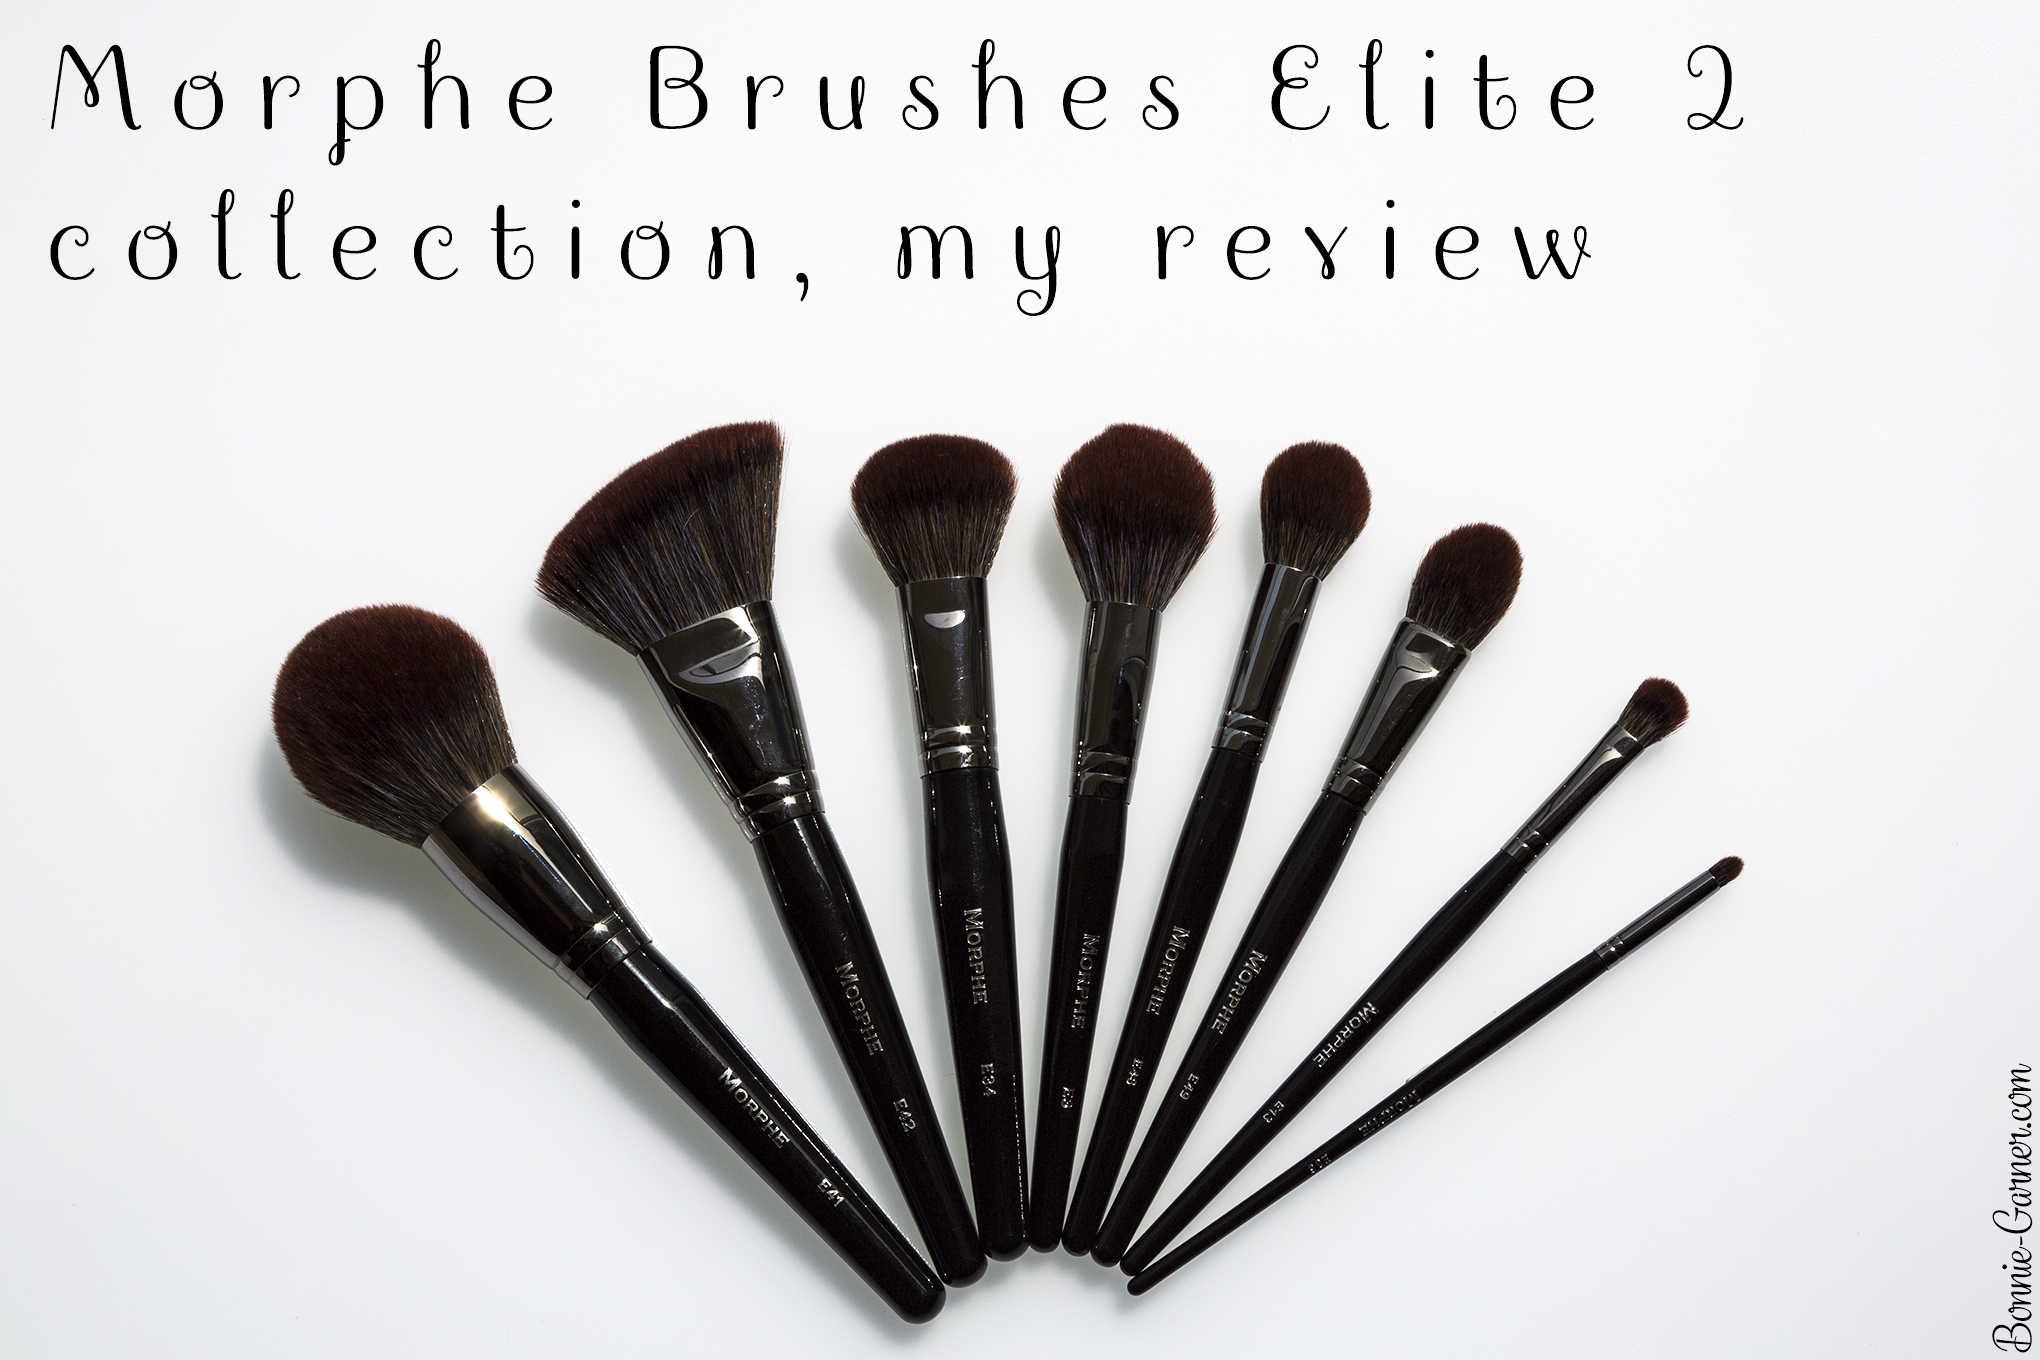 Morphe Brushes Elite 2 collection, my review